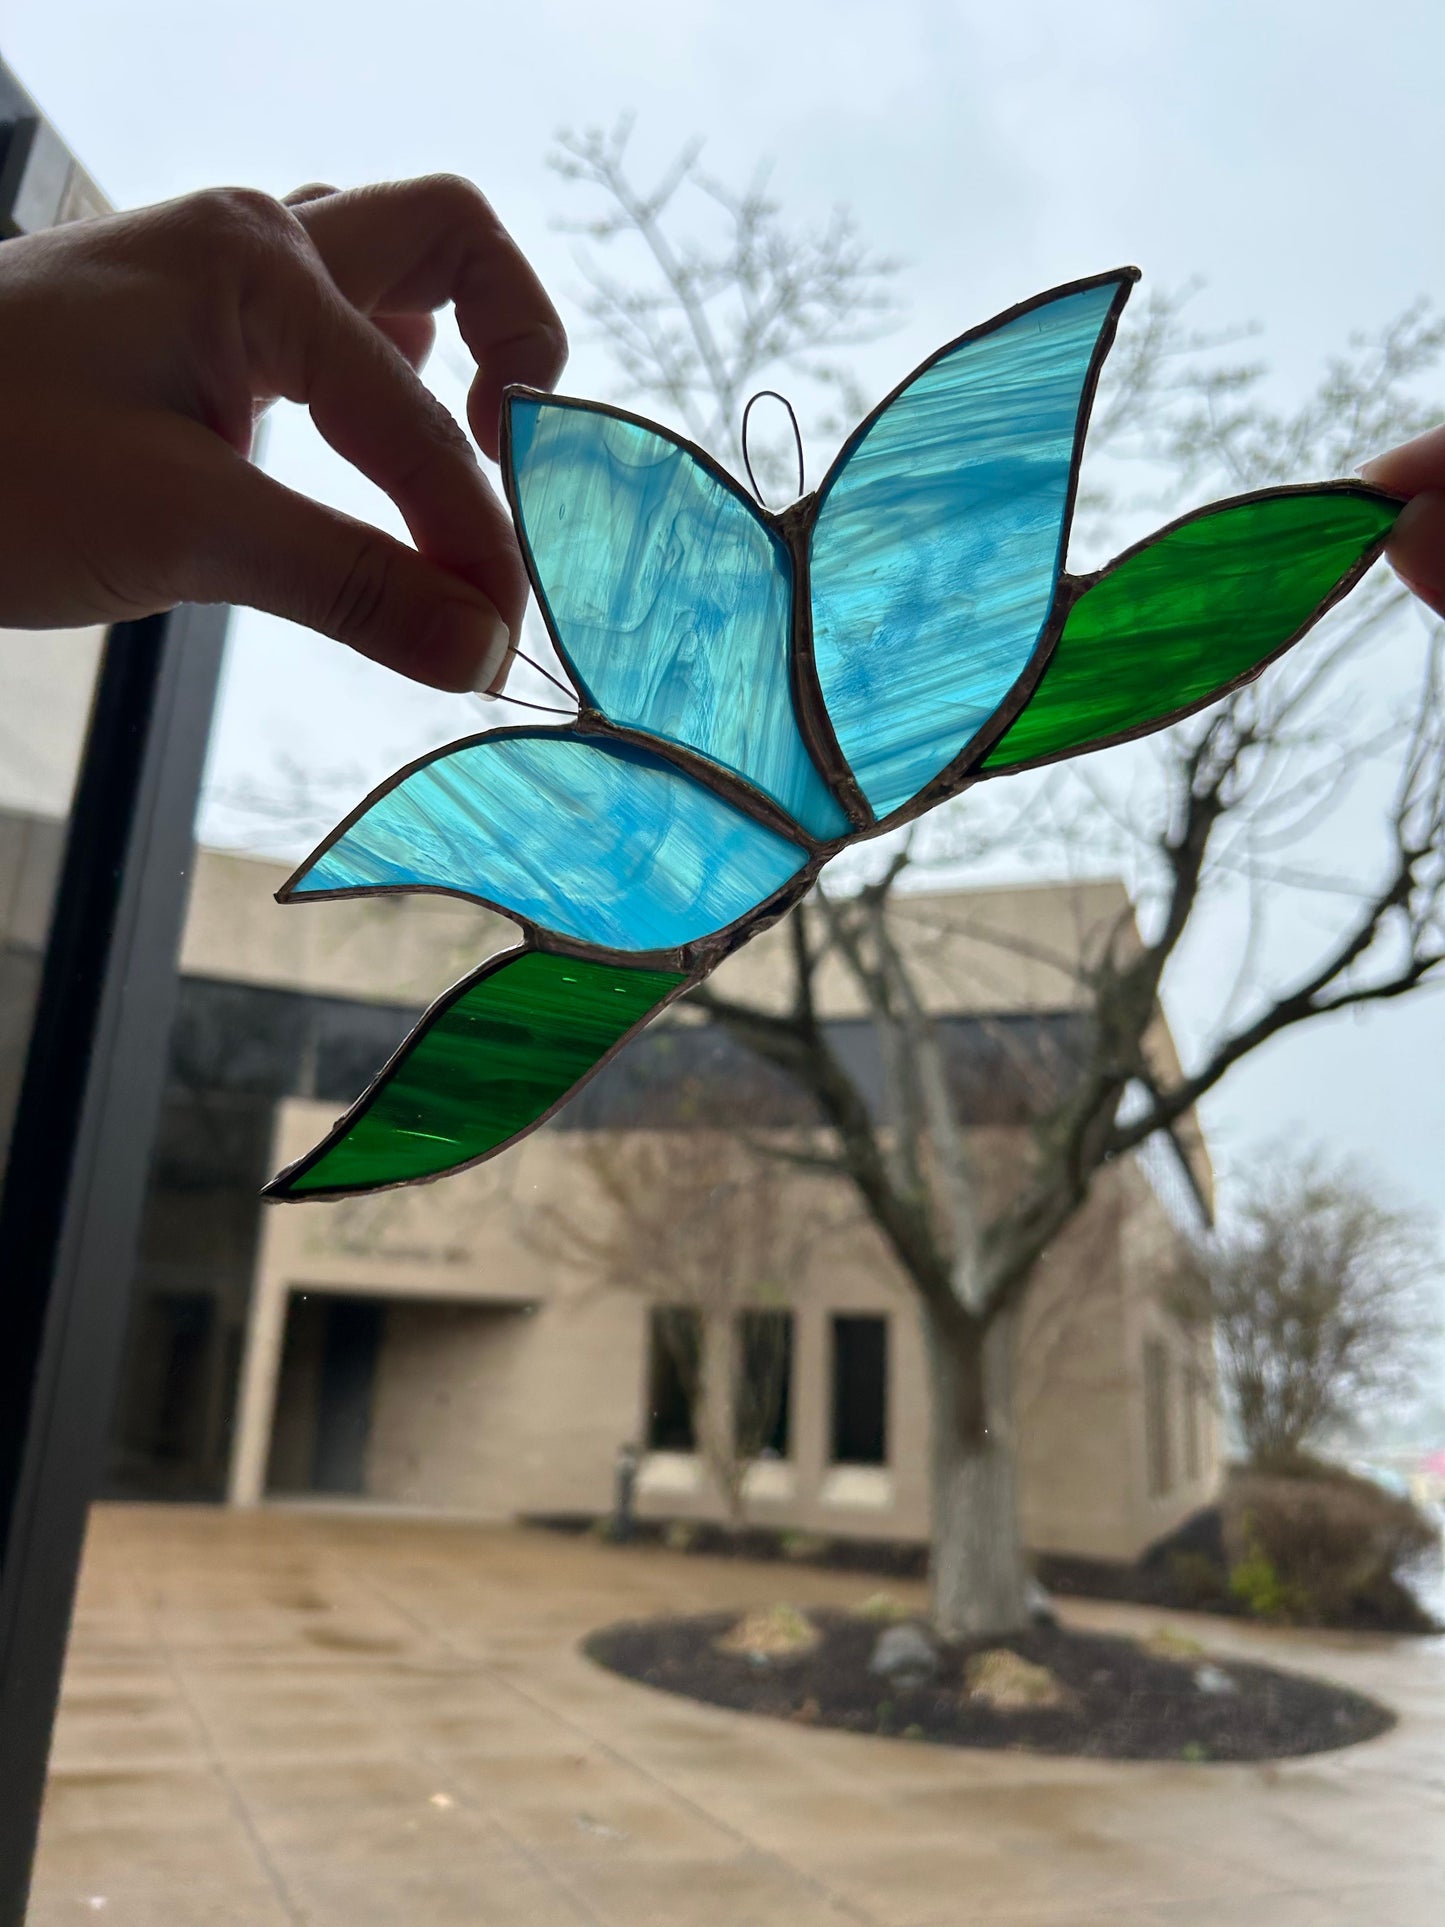 Beginner Stained Glass class, April 4, 4-6:30 pm